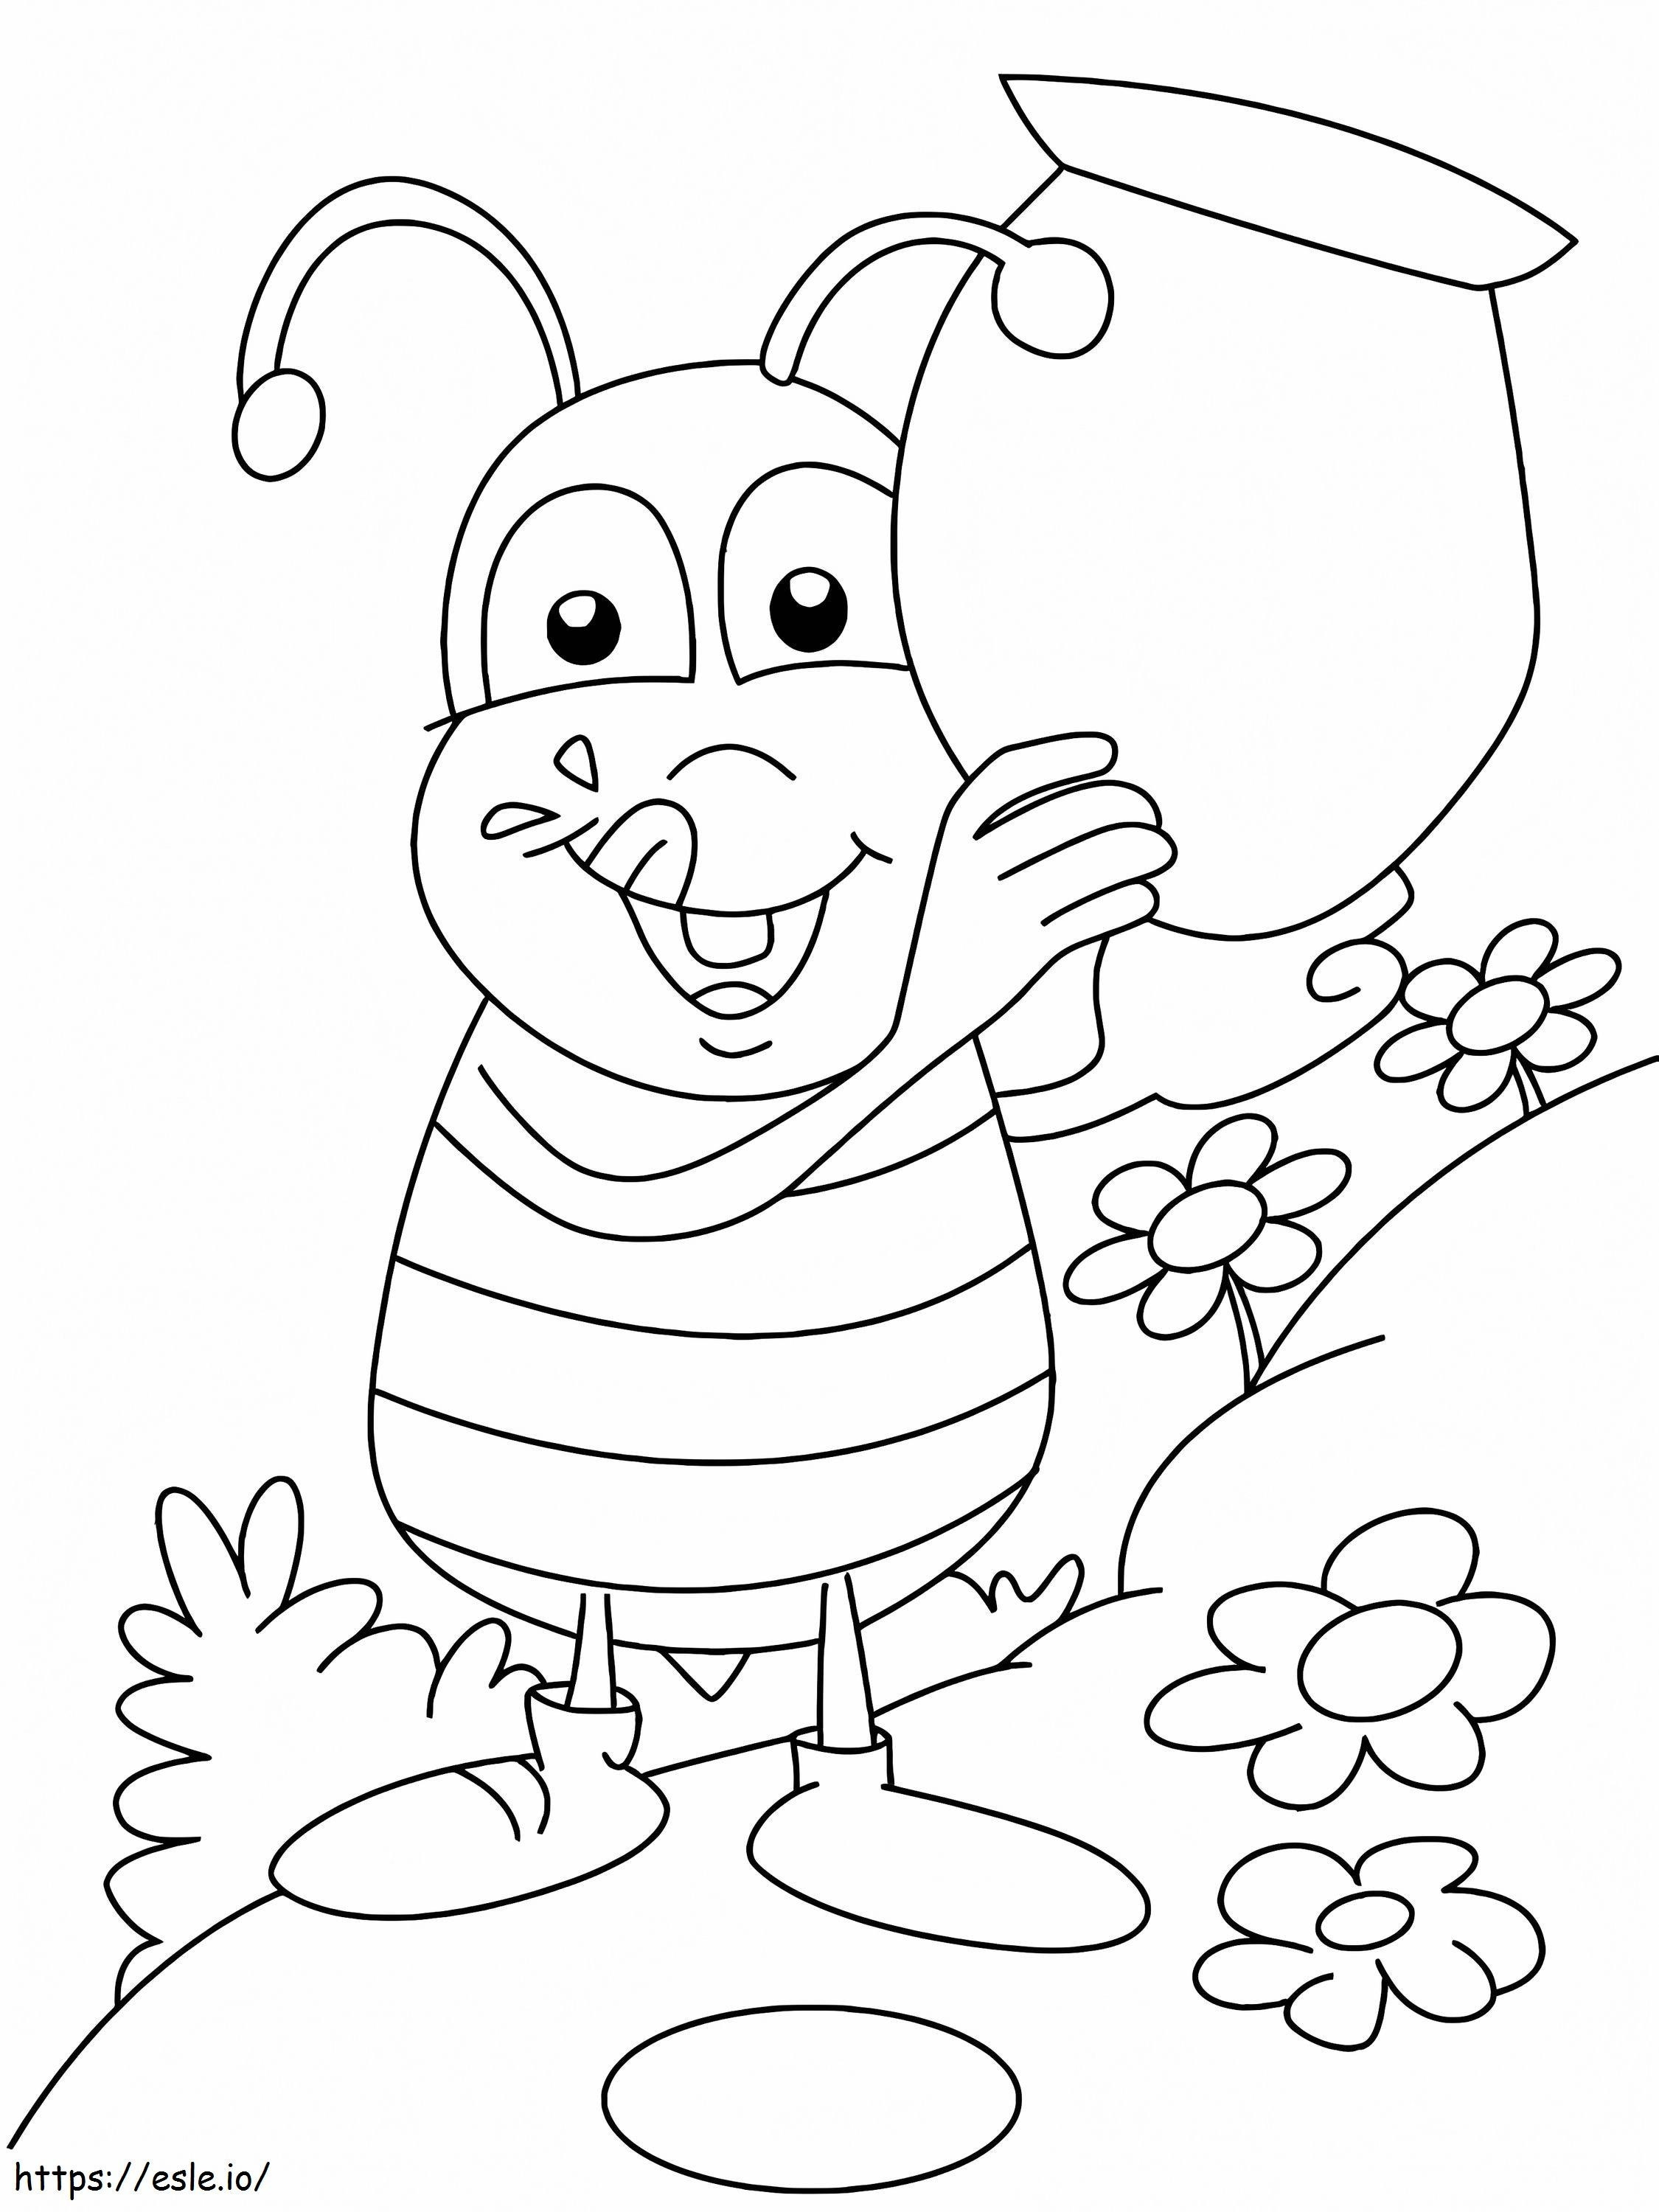 Bee Holding Jar coloring page